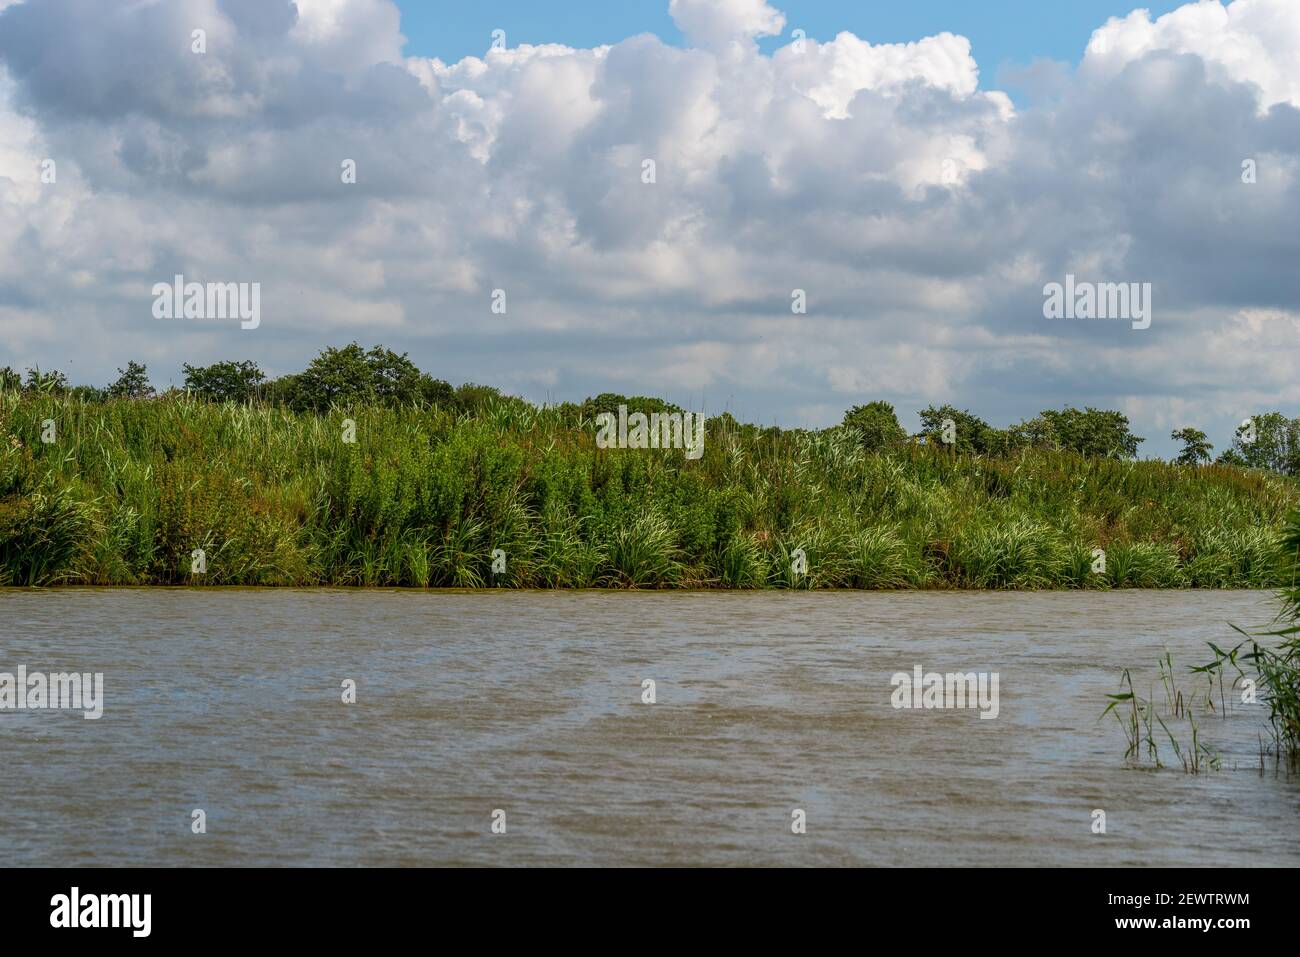 View over a sewer with reed and dramatic clouds in the blue sky in Friesland, Lower Saxony, Germany Stock Photo